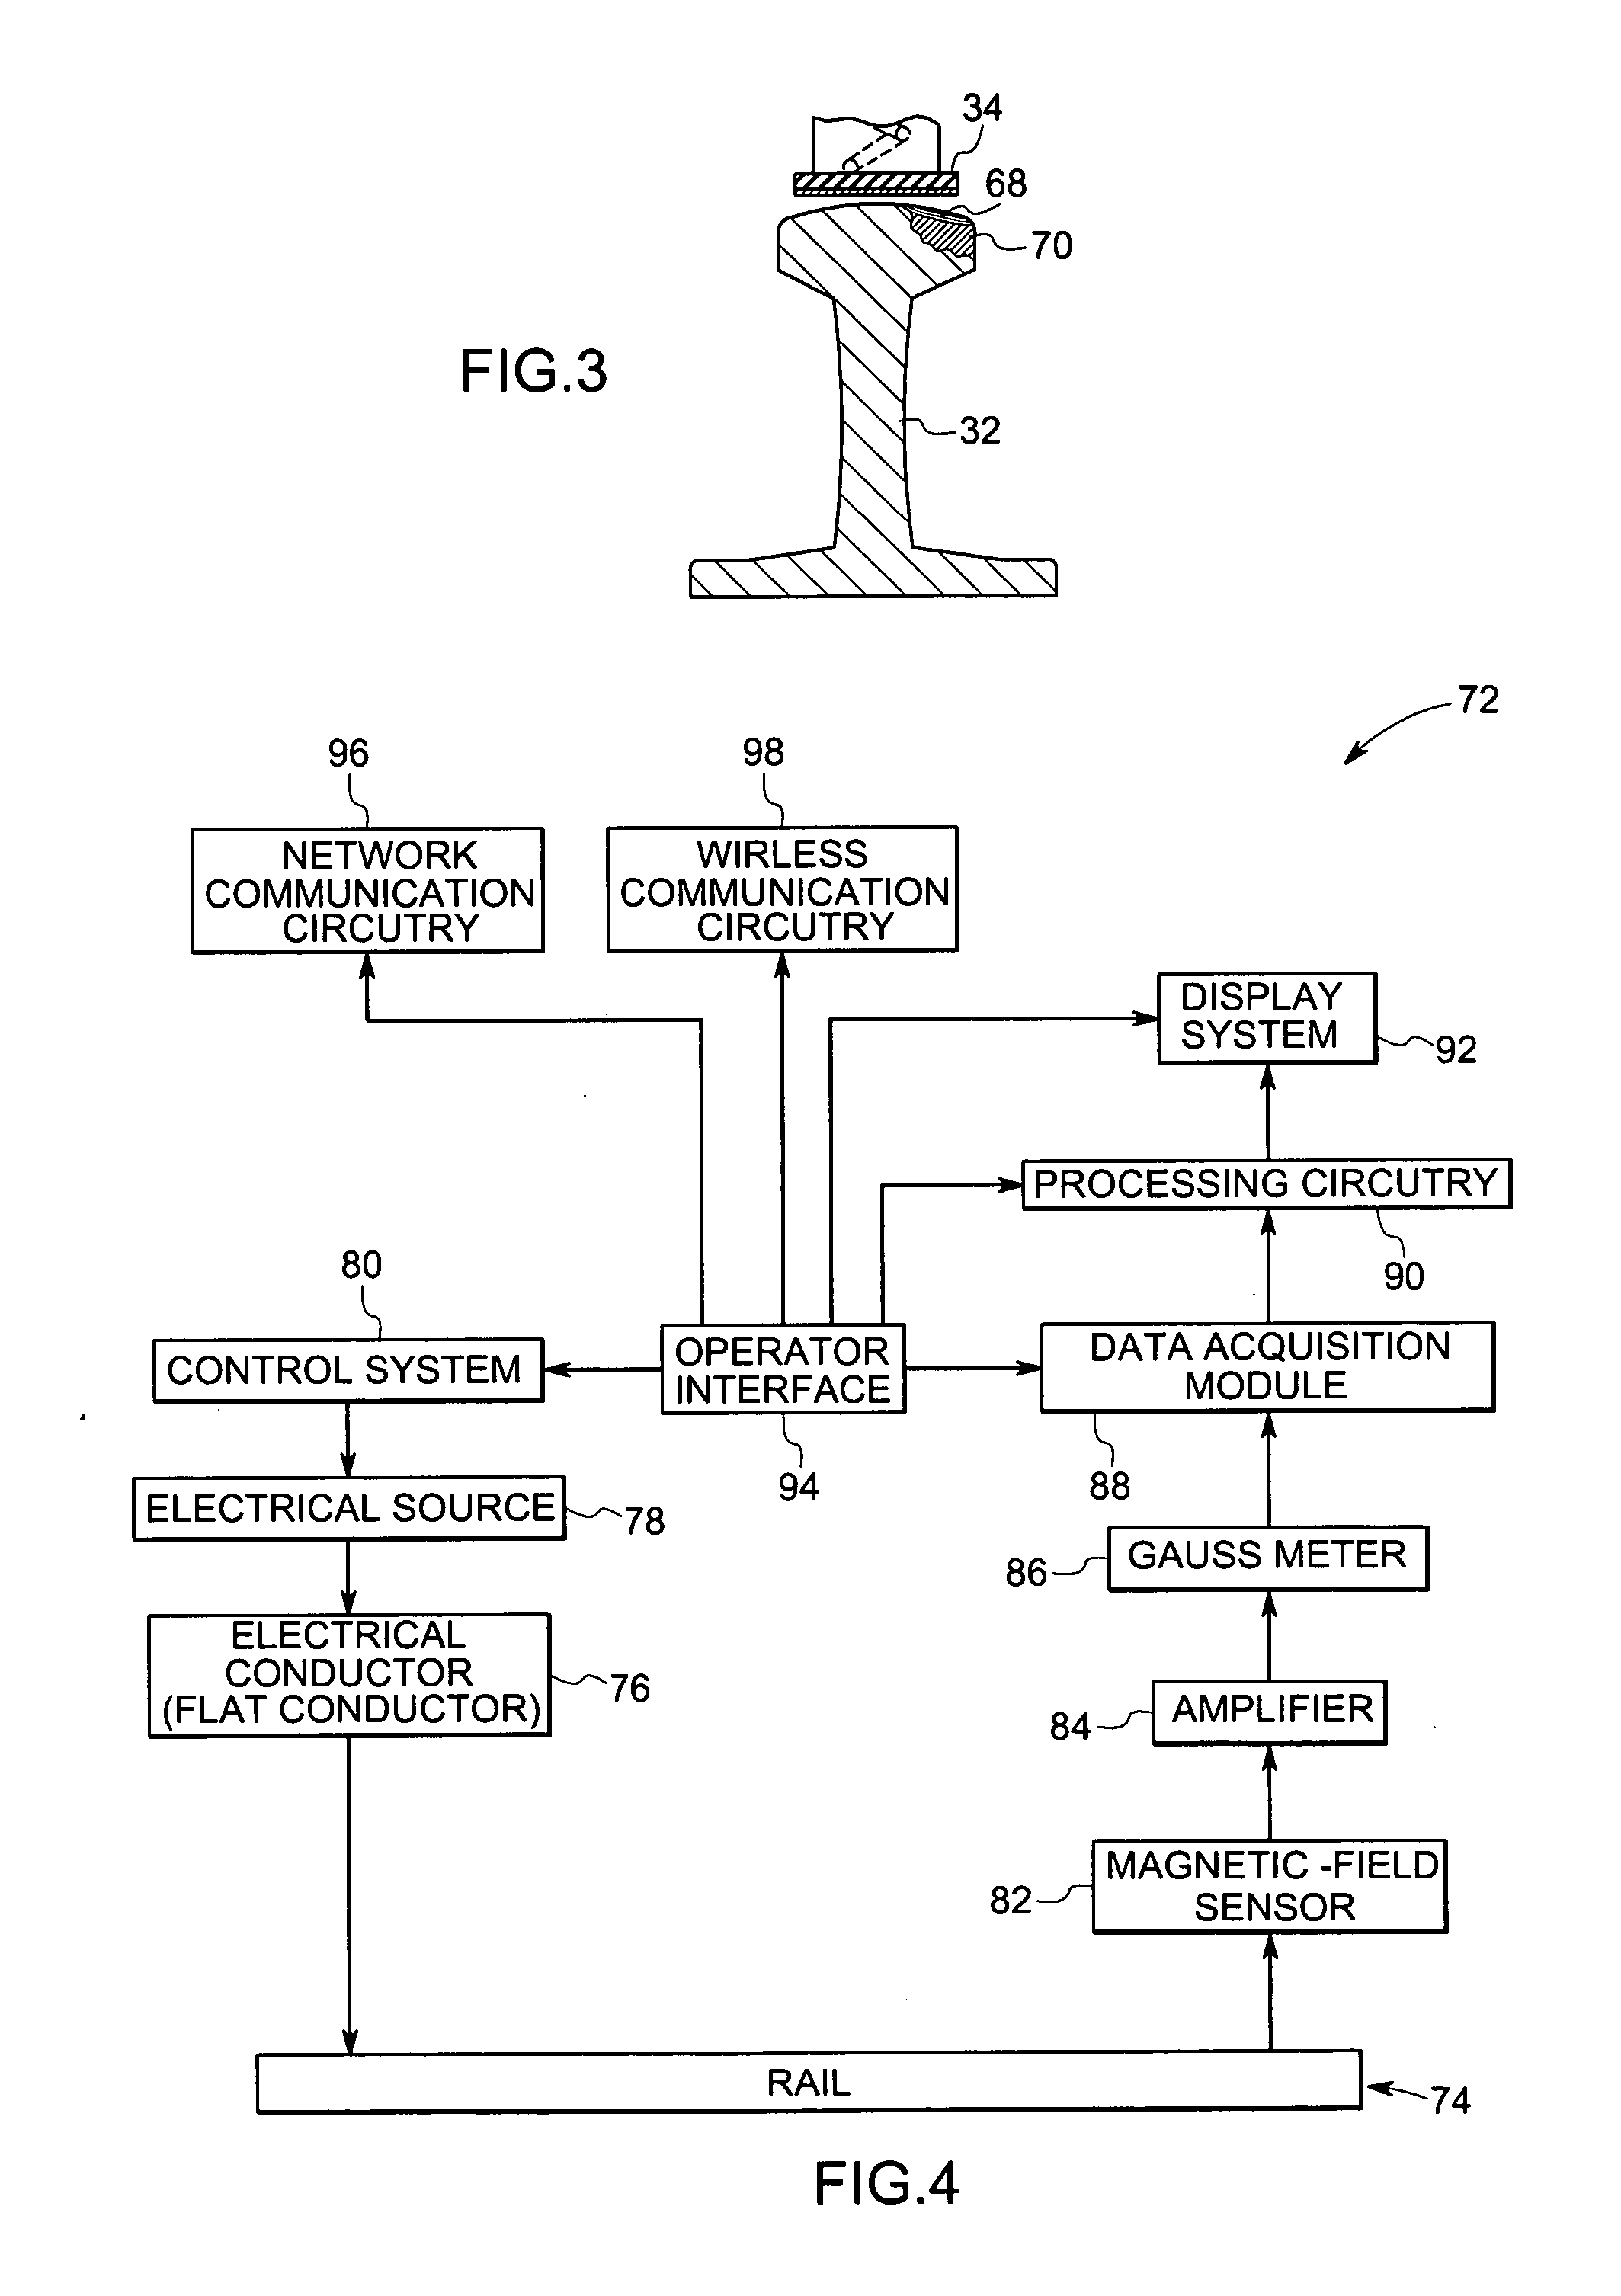 Method and apparatus for testing material integrity